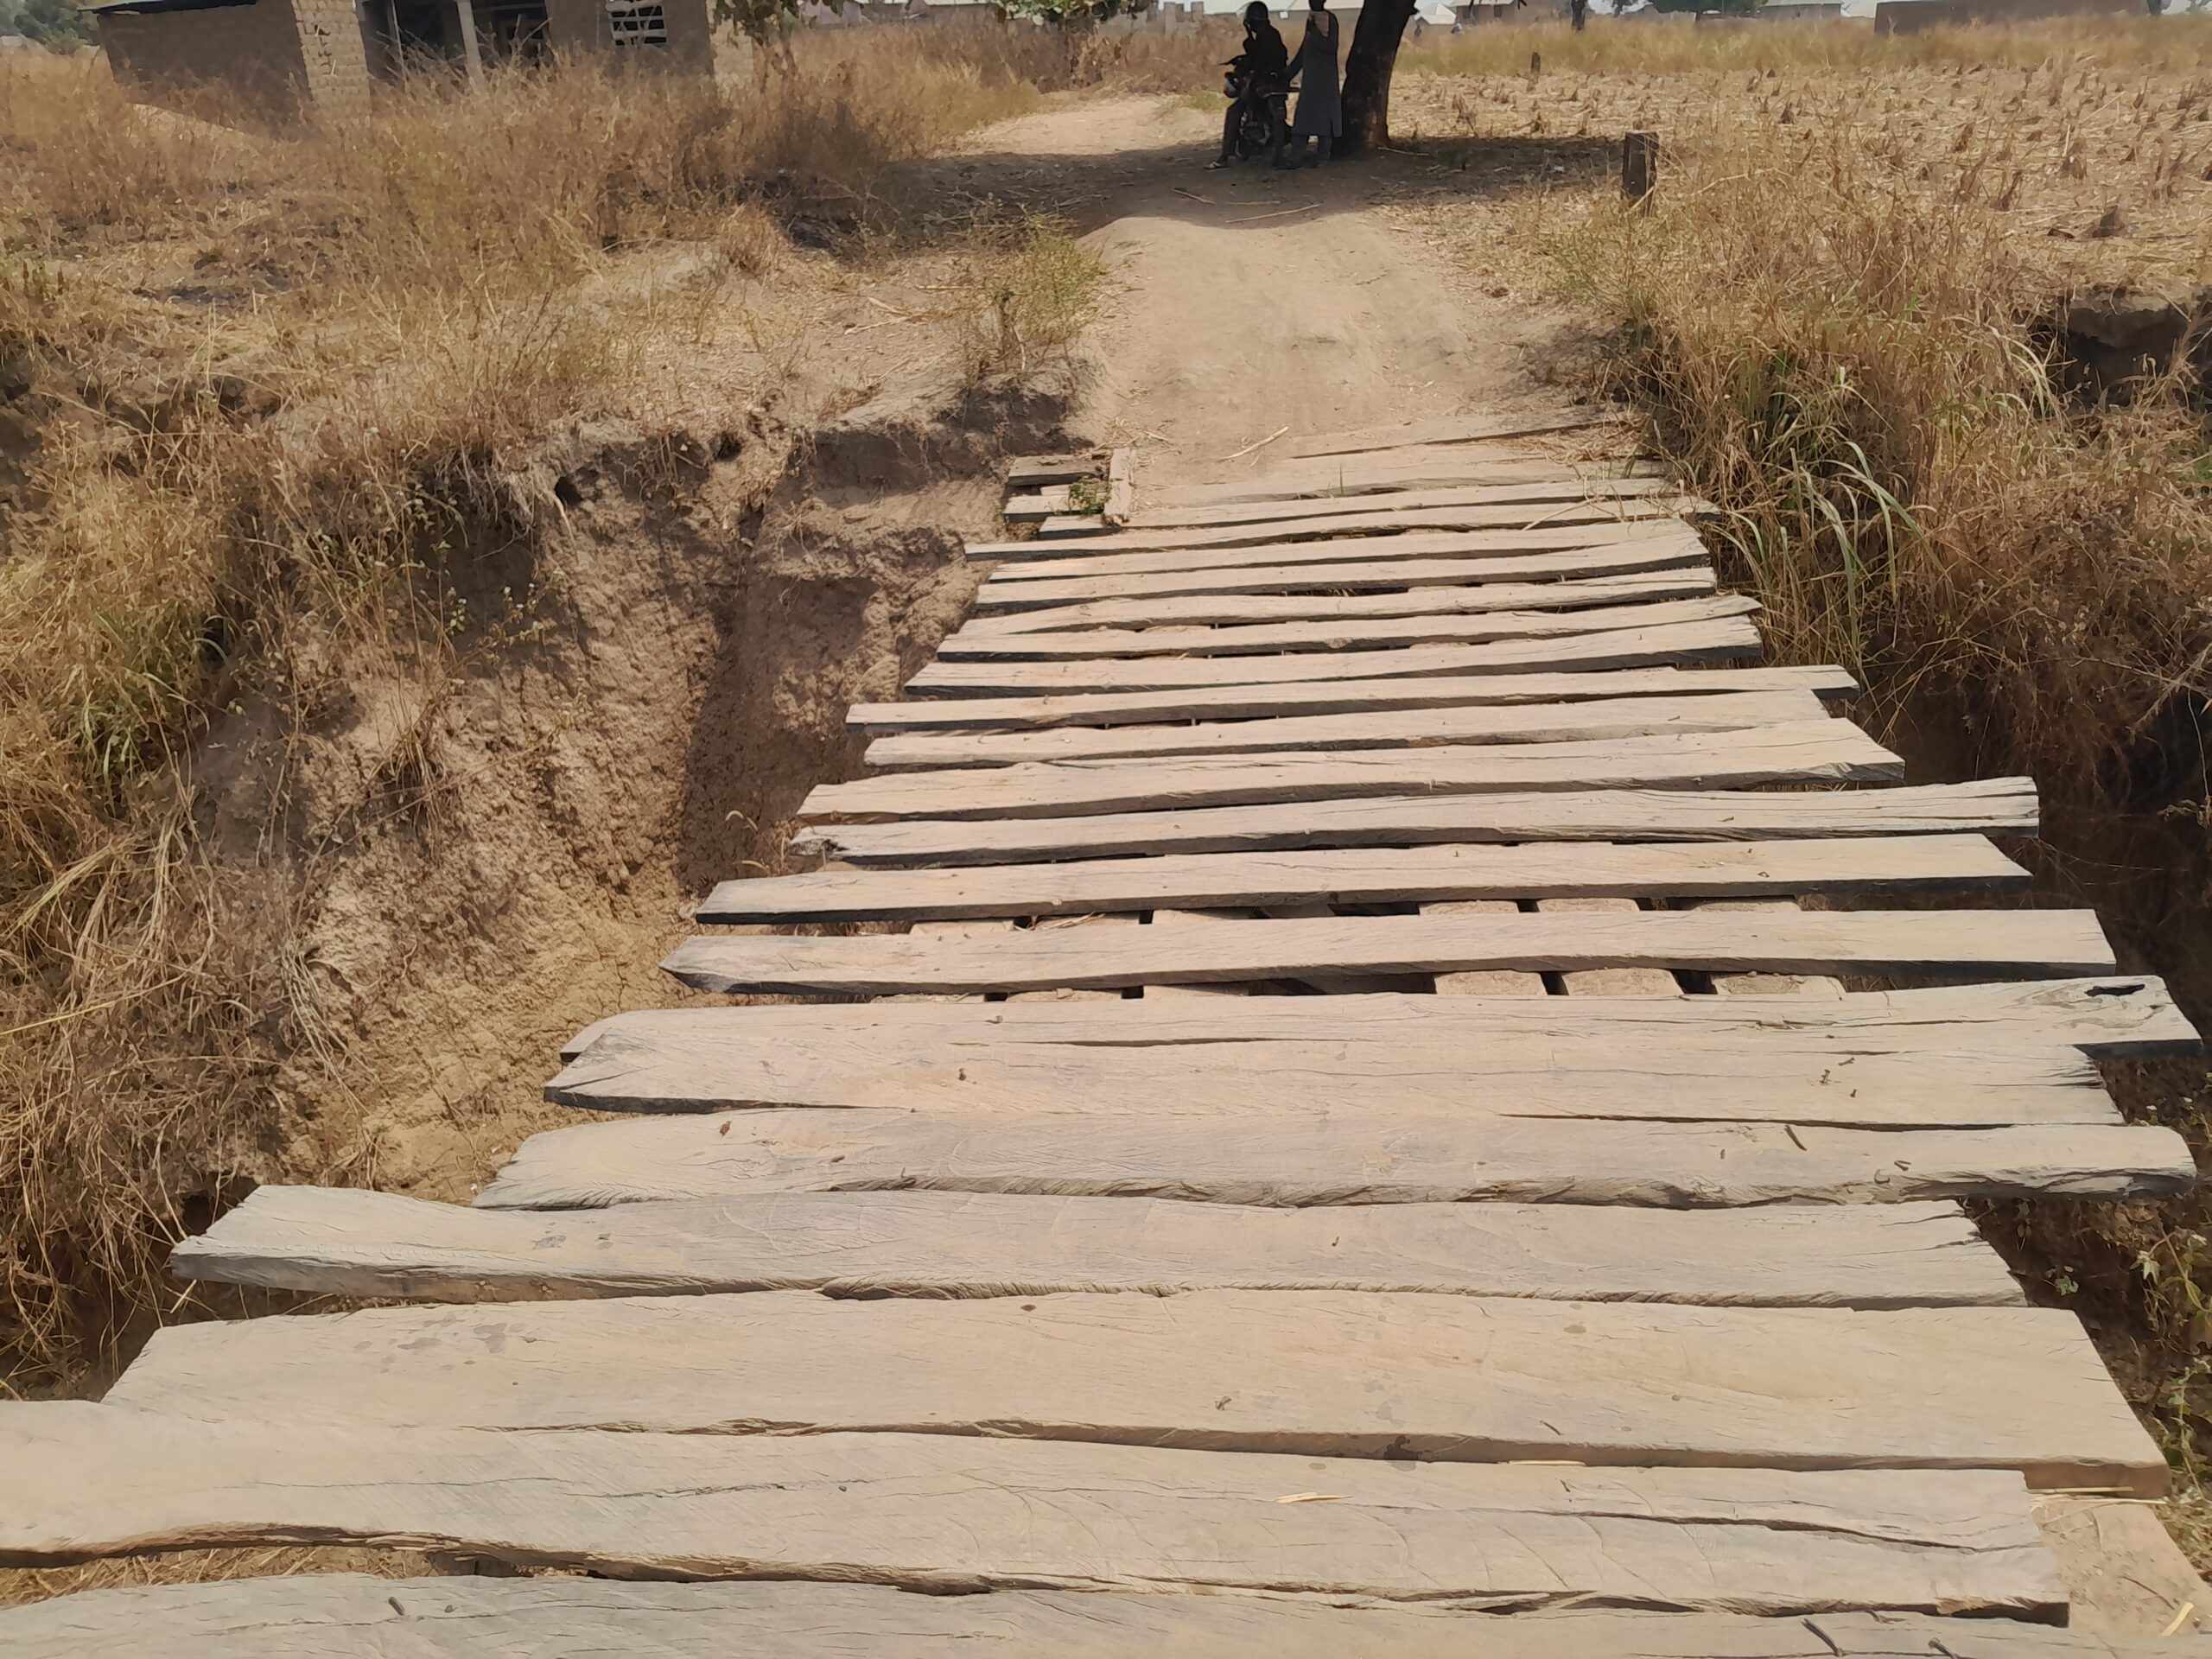 The road leading to Garin Buba suffers from a collapsing bridge, but the residents collaborated to build a wooden bridge. Photo Credit Yahuza Bawage Prime Progress.